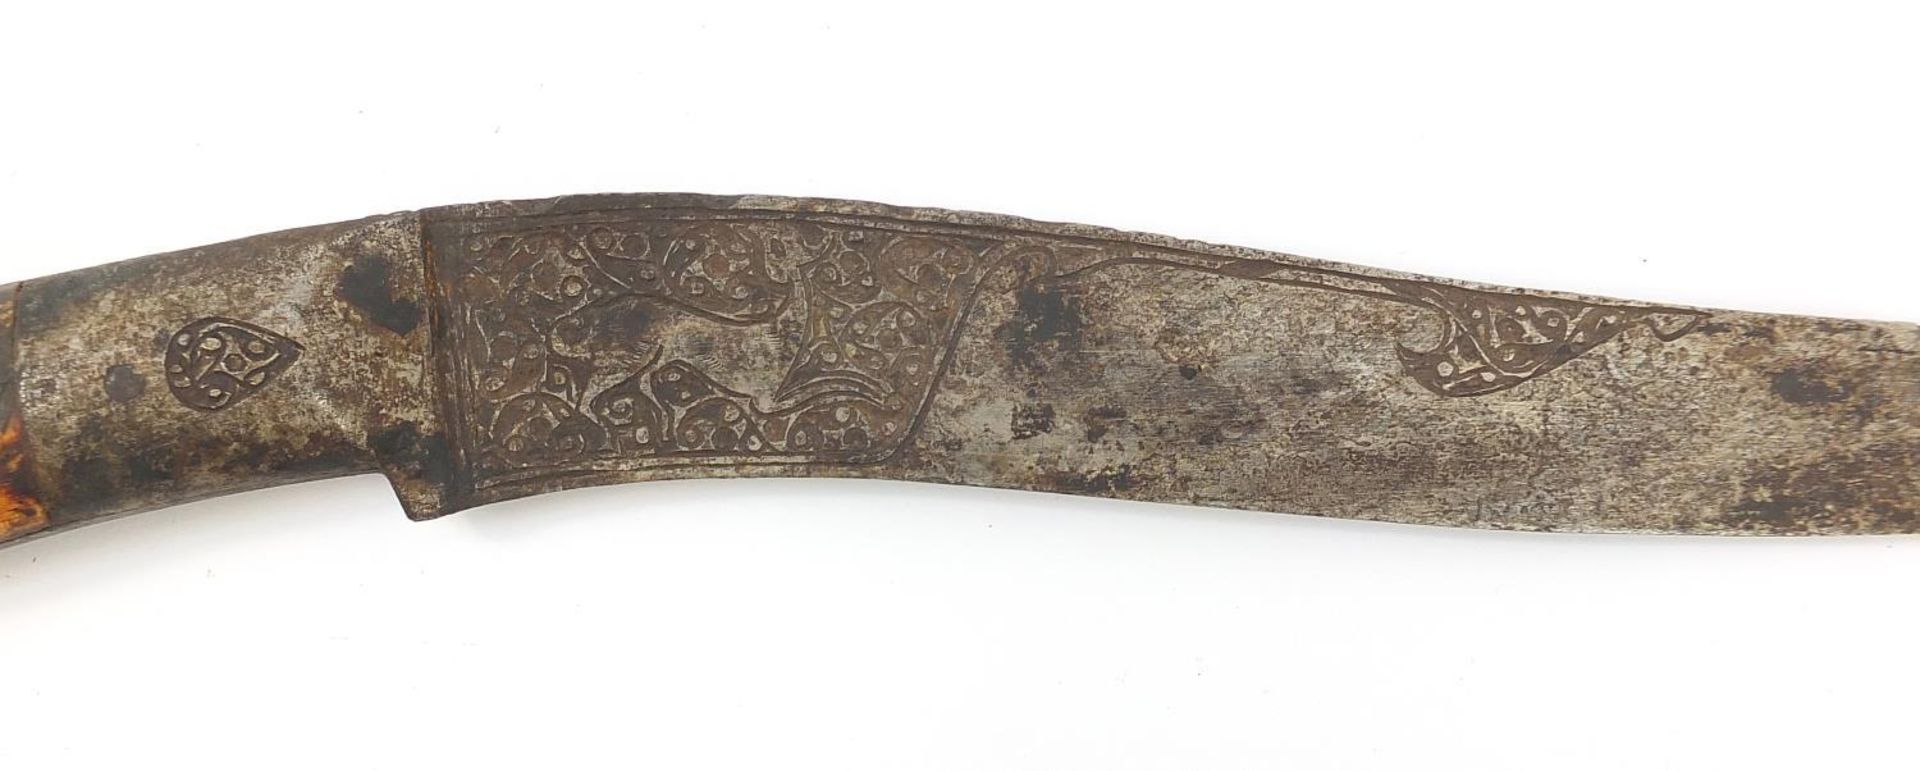 Afghan Pesh-kabz dagger with bone handle and steel blade engraved with a wild animal amongst - Image 4 of 4